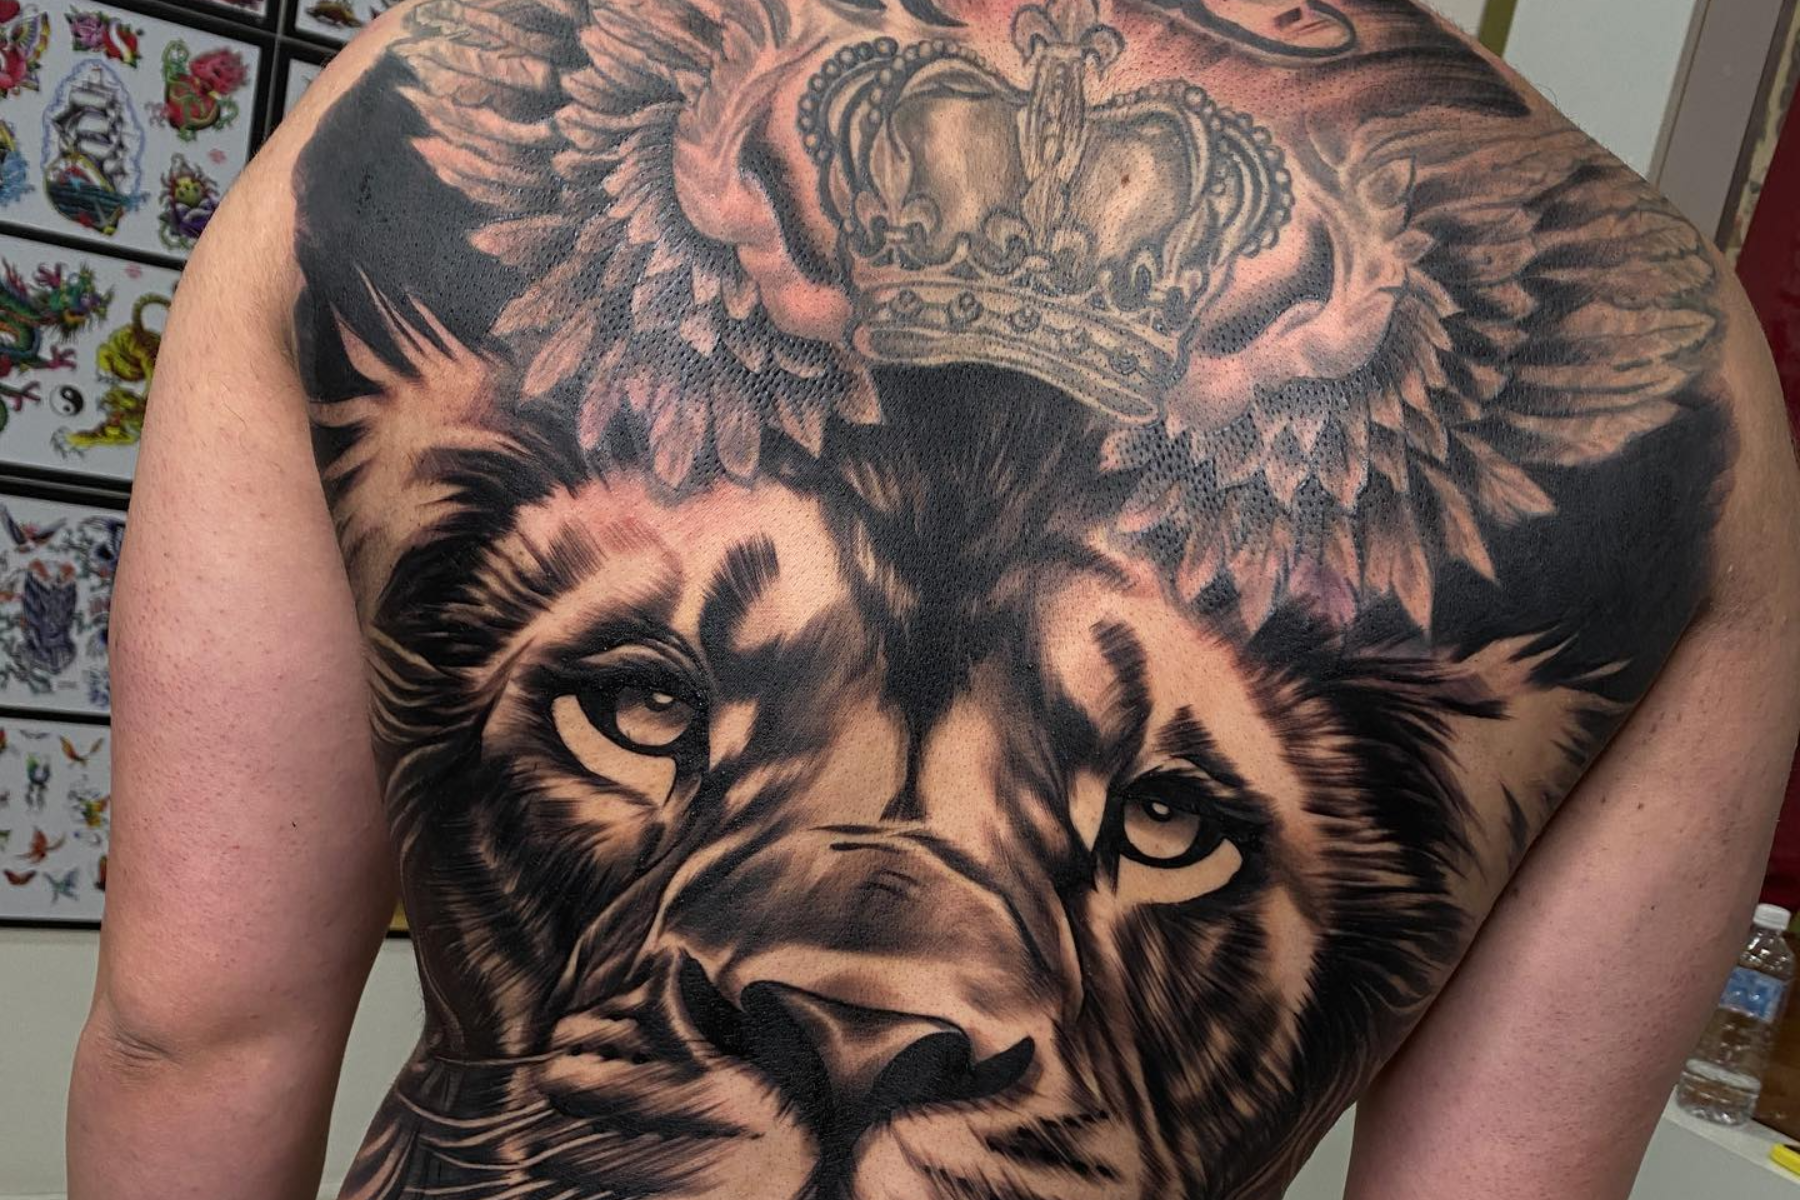 A man is having a lion head and crown tattoo